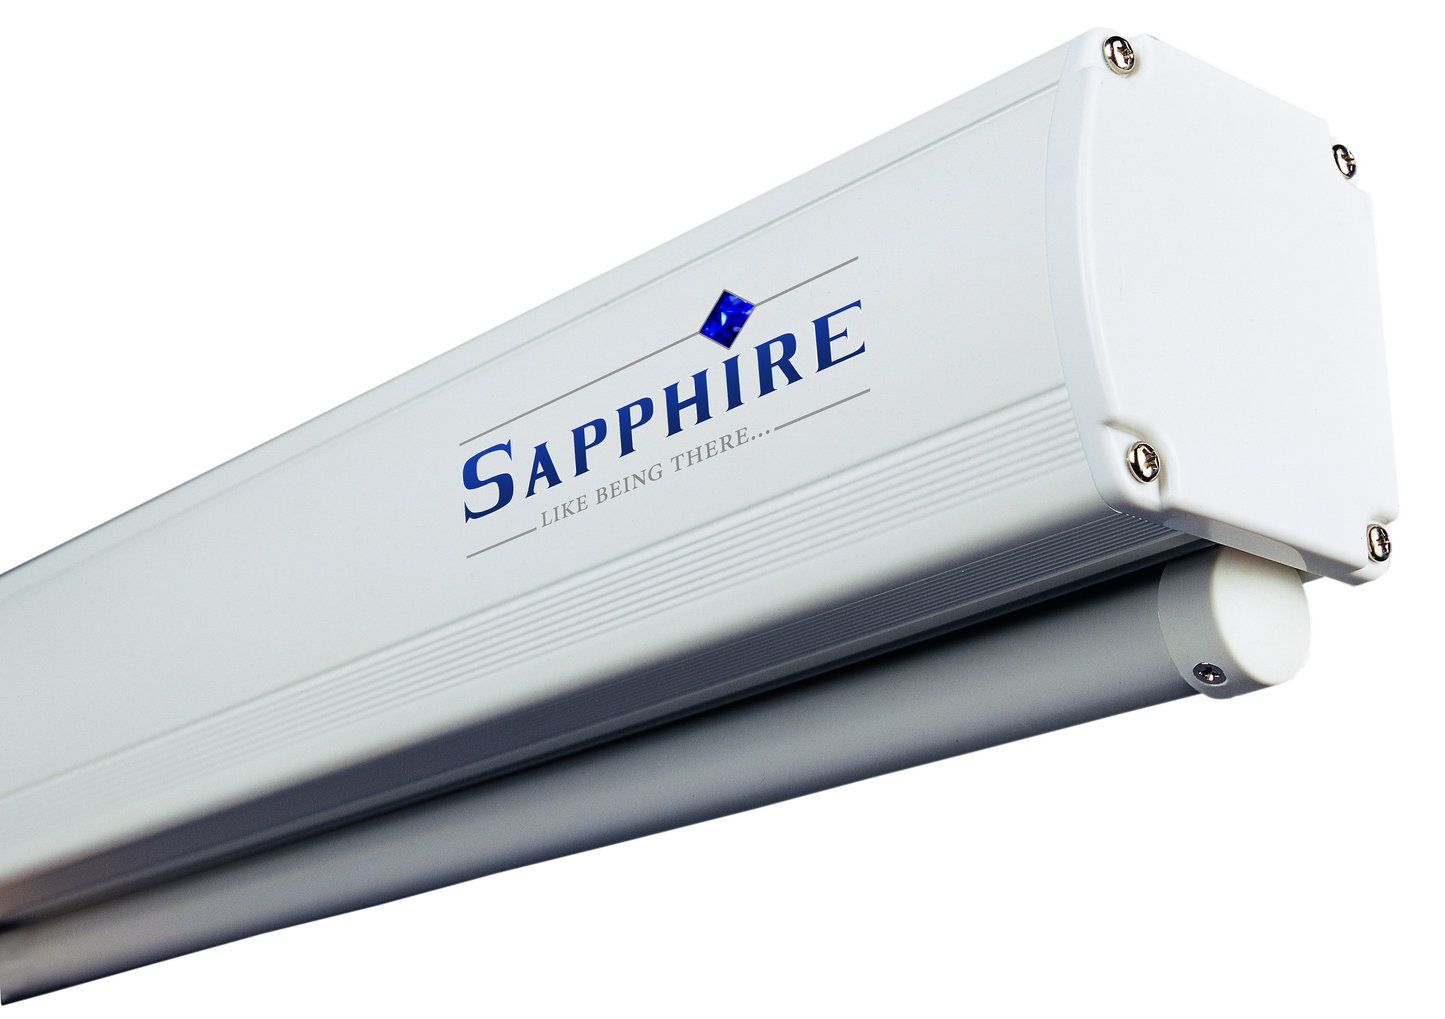 Sapphire Aluminum Slow Retraction Manual Screen 4:3 Format Viewing Area 1710mm x 1280mm with channel fix brackets Approx Case Dimensions L 1864mm x H 93mm x D 79mm